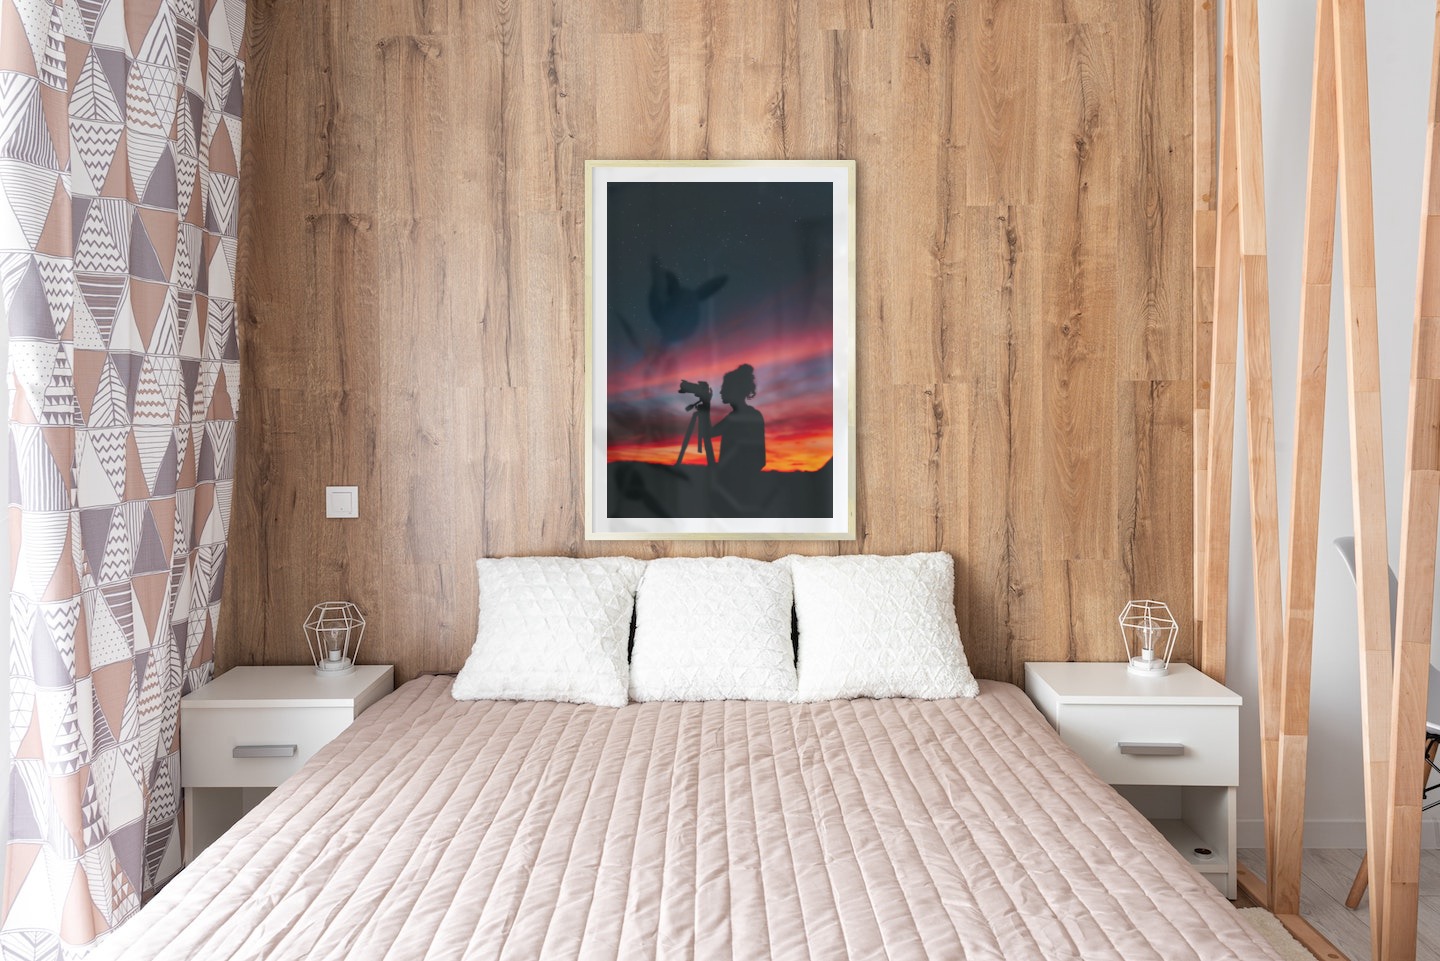 Gallery wall with picture frame in gold in size 70x100 with print "Photographer at night"